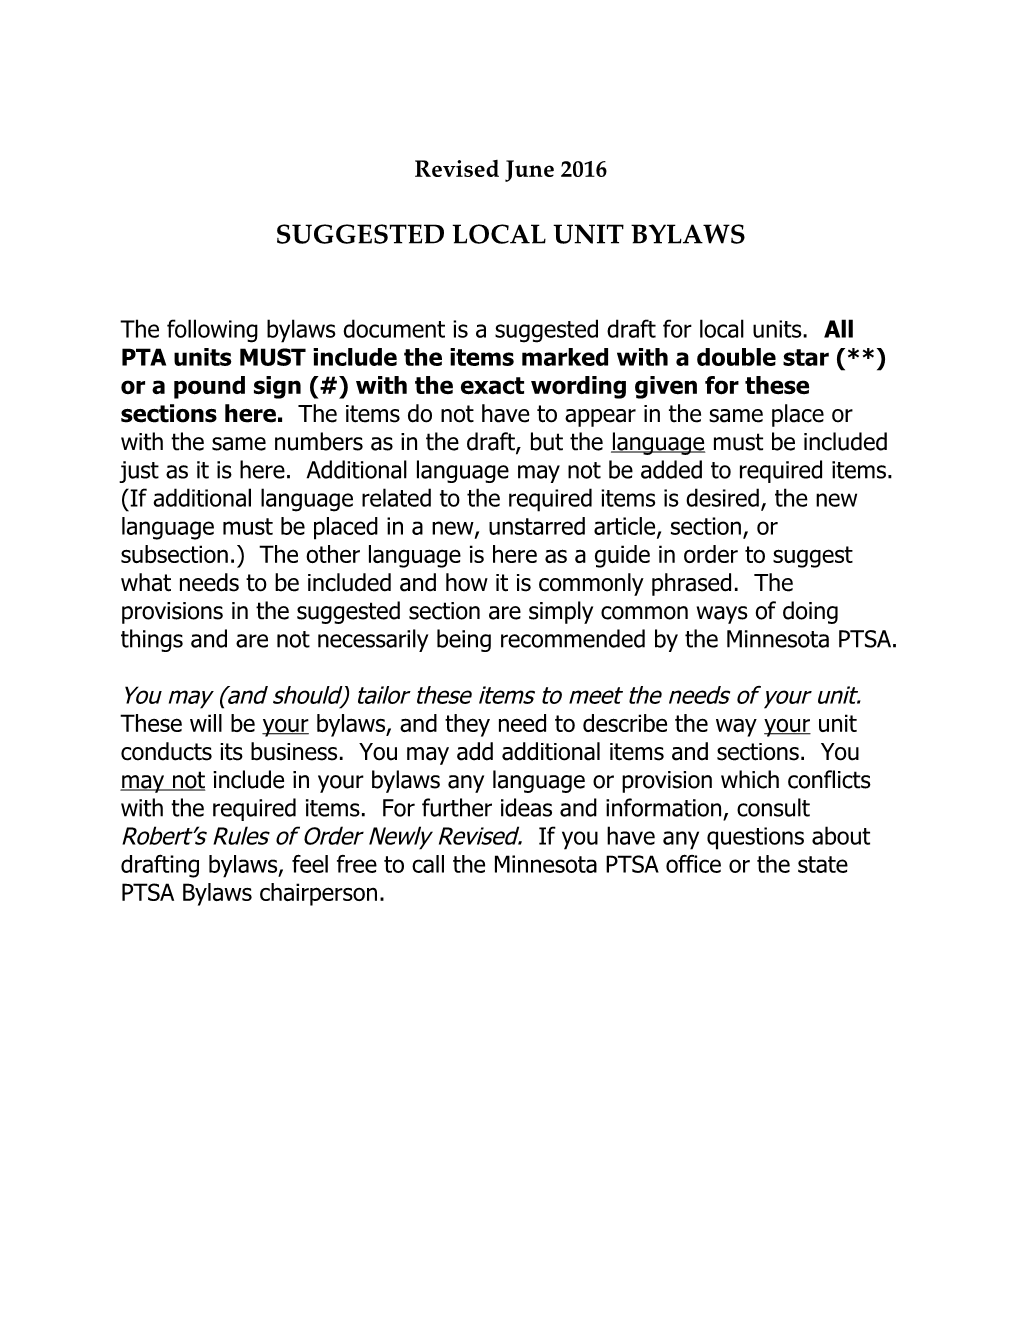 Suggested Local Unit Bylaws